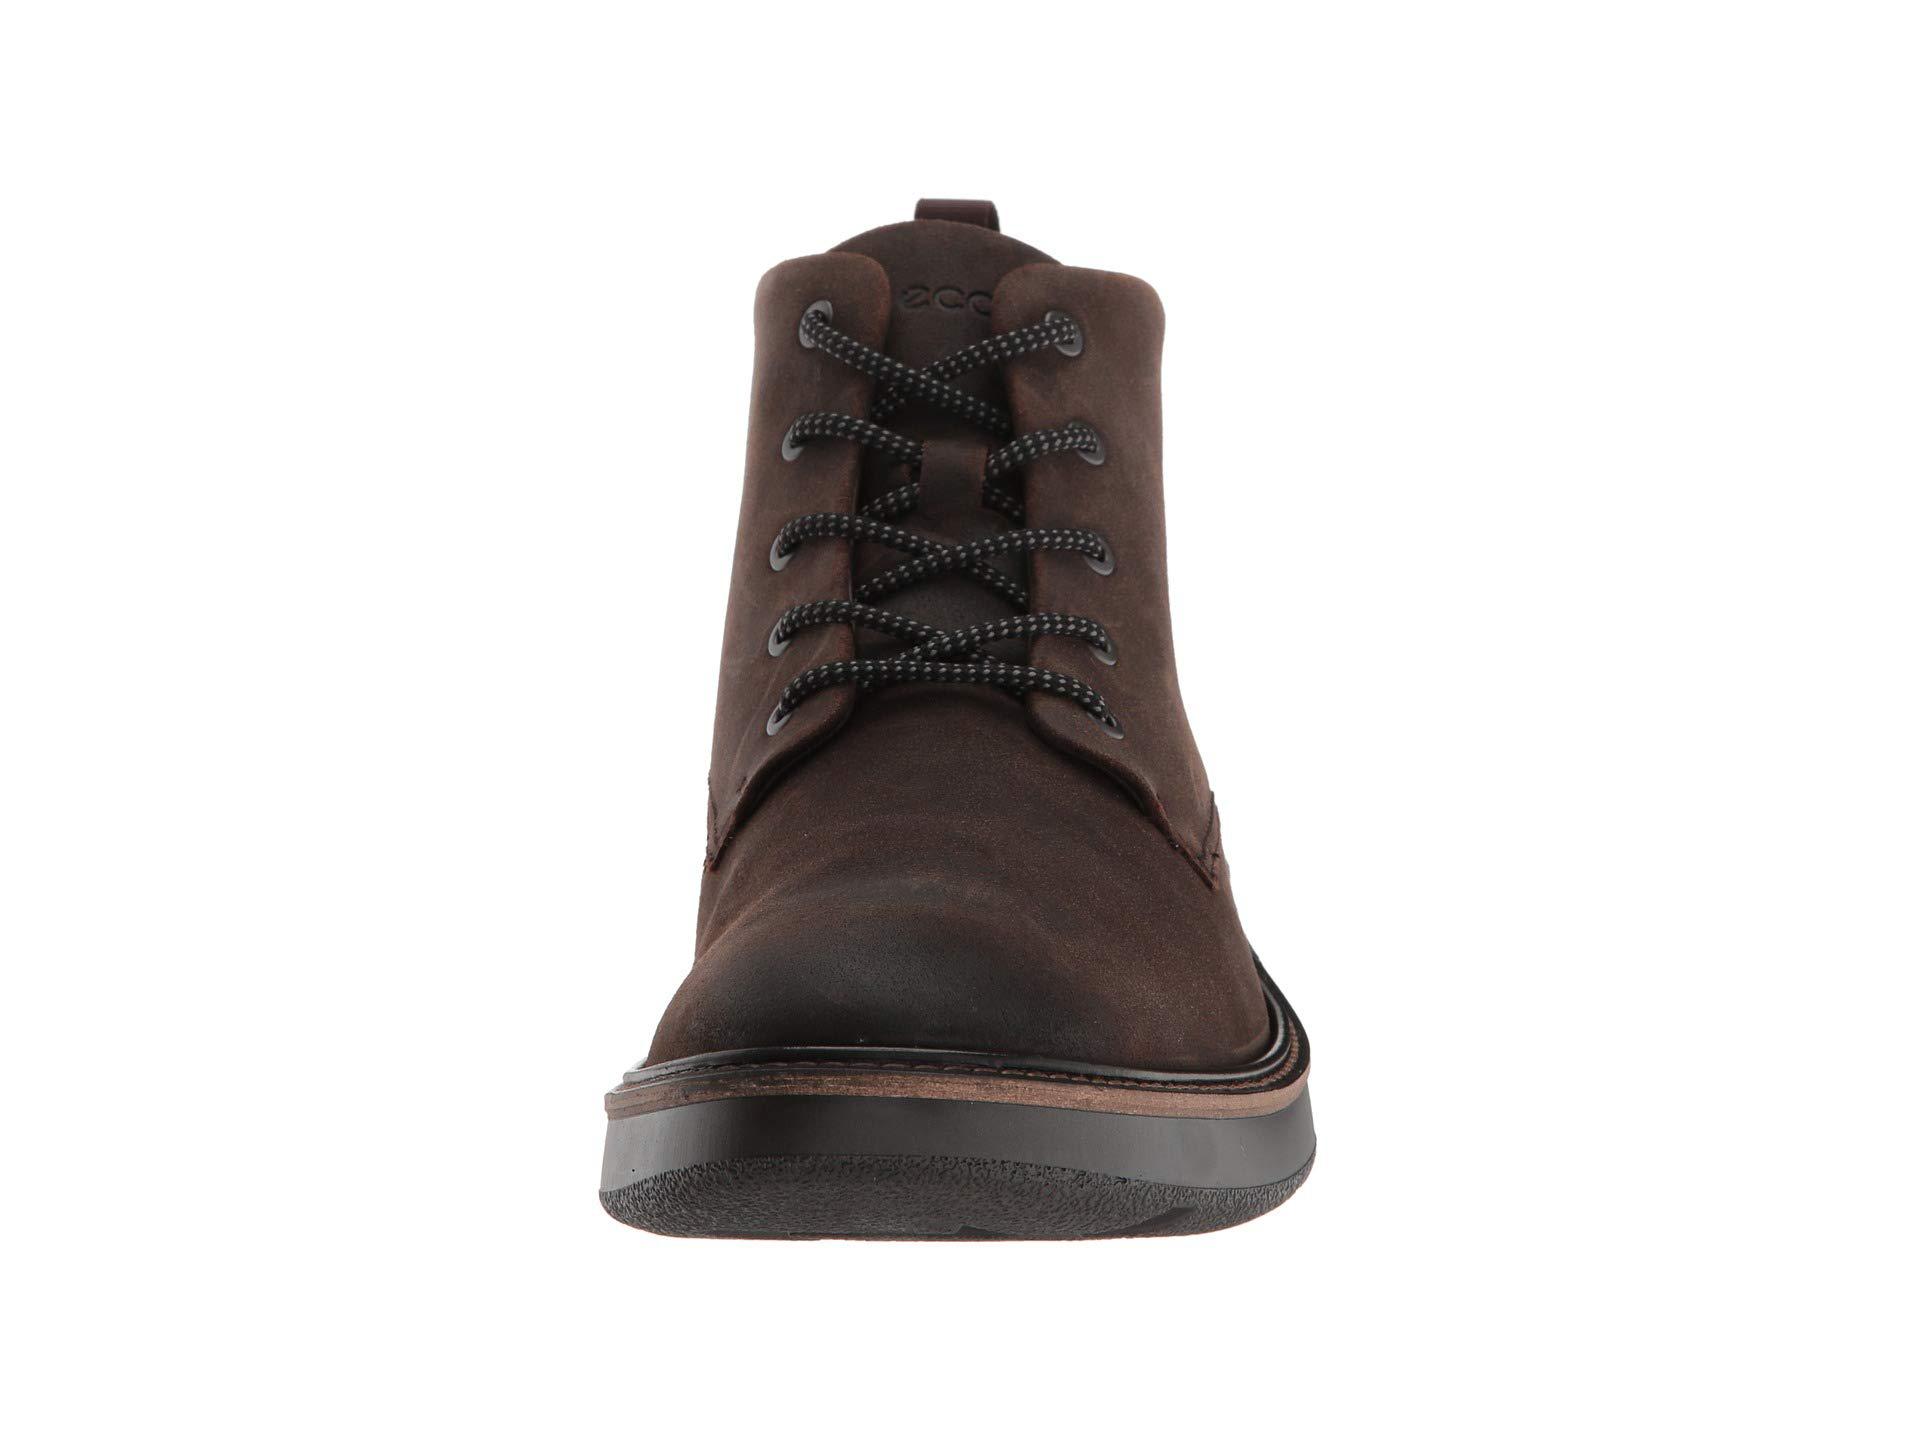 Ecco Leather Aurora Mid Boot, Ankle Boots in Coffee Suede (Brown) for Men |  Lyst